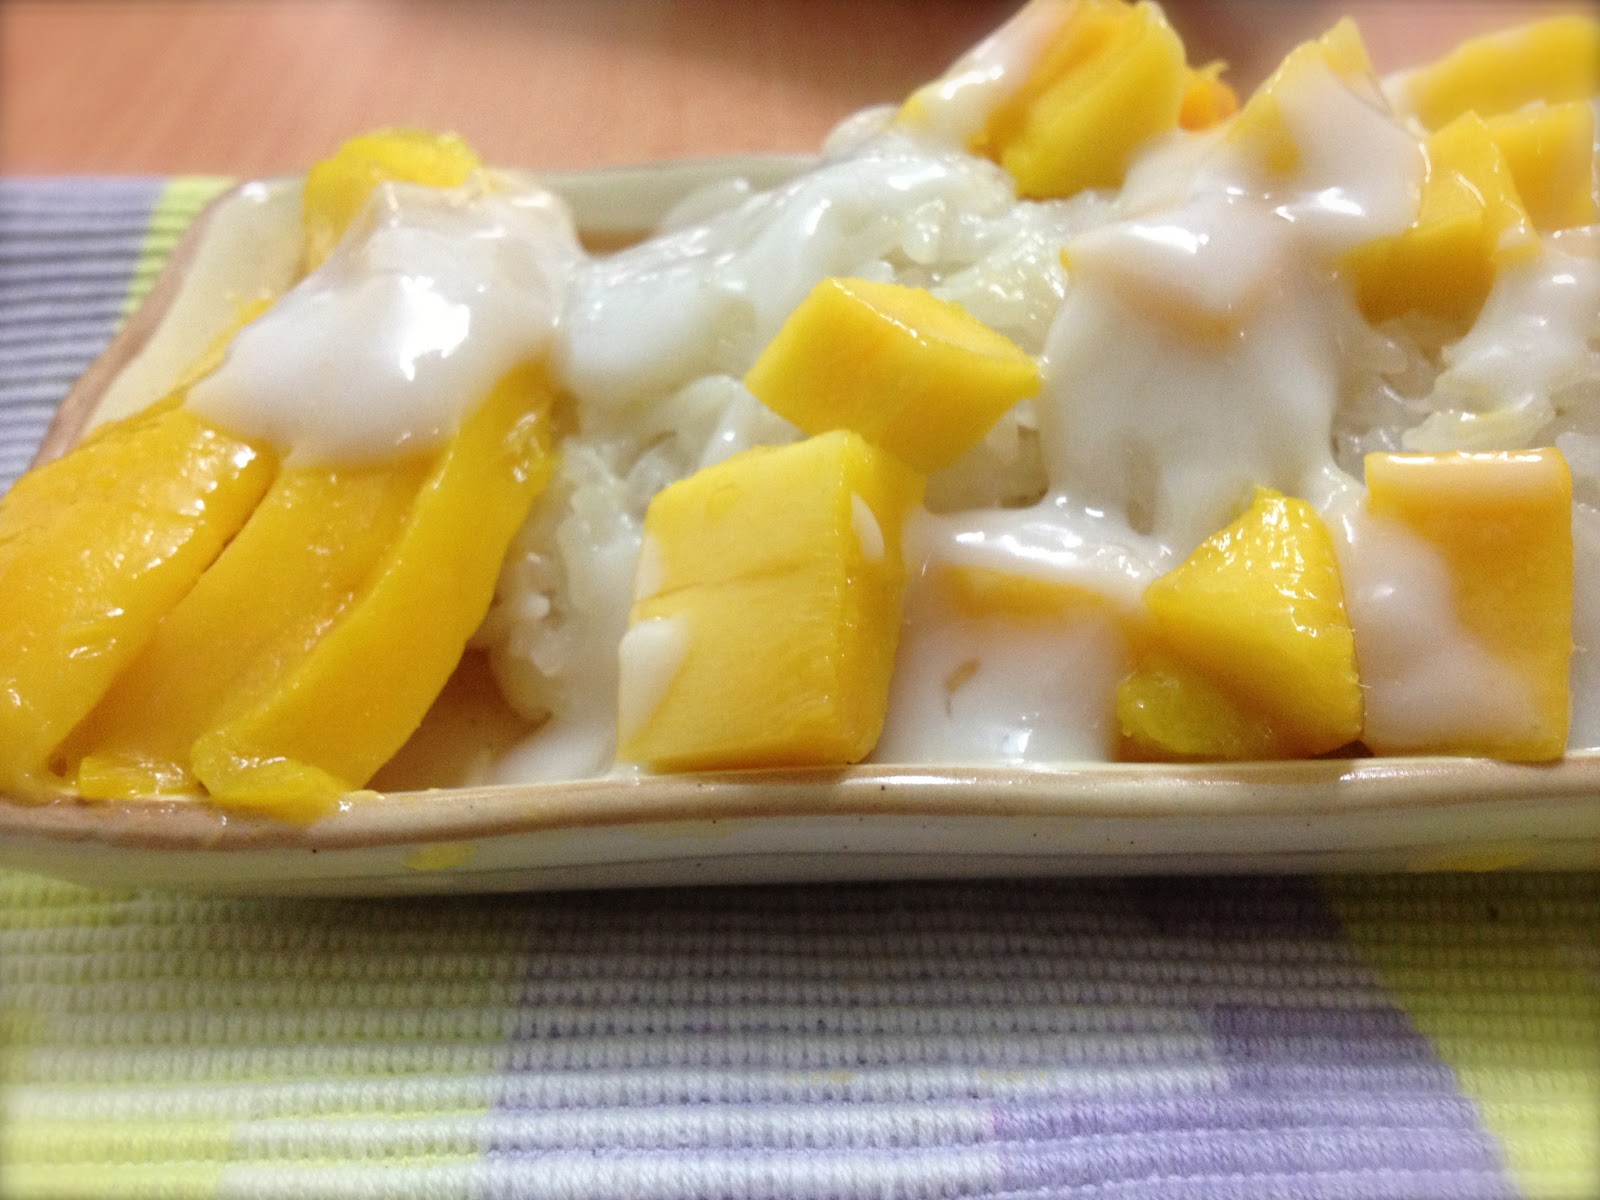 We Have a Lovely Home: Classic Scrumptious Thai Sticky Rice With Mango